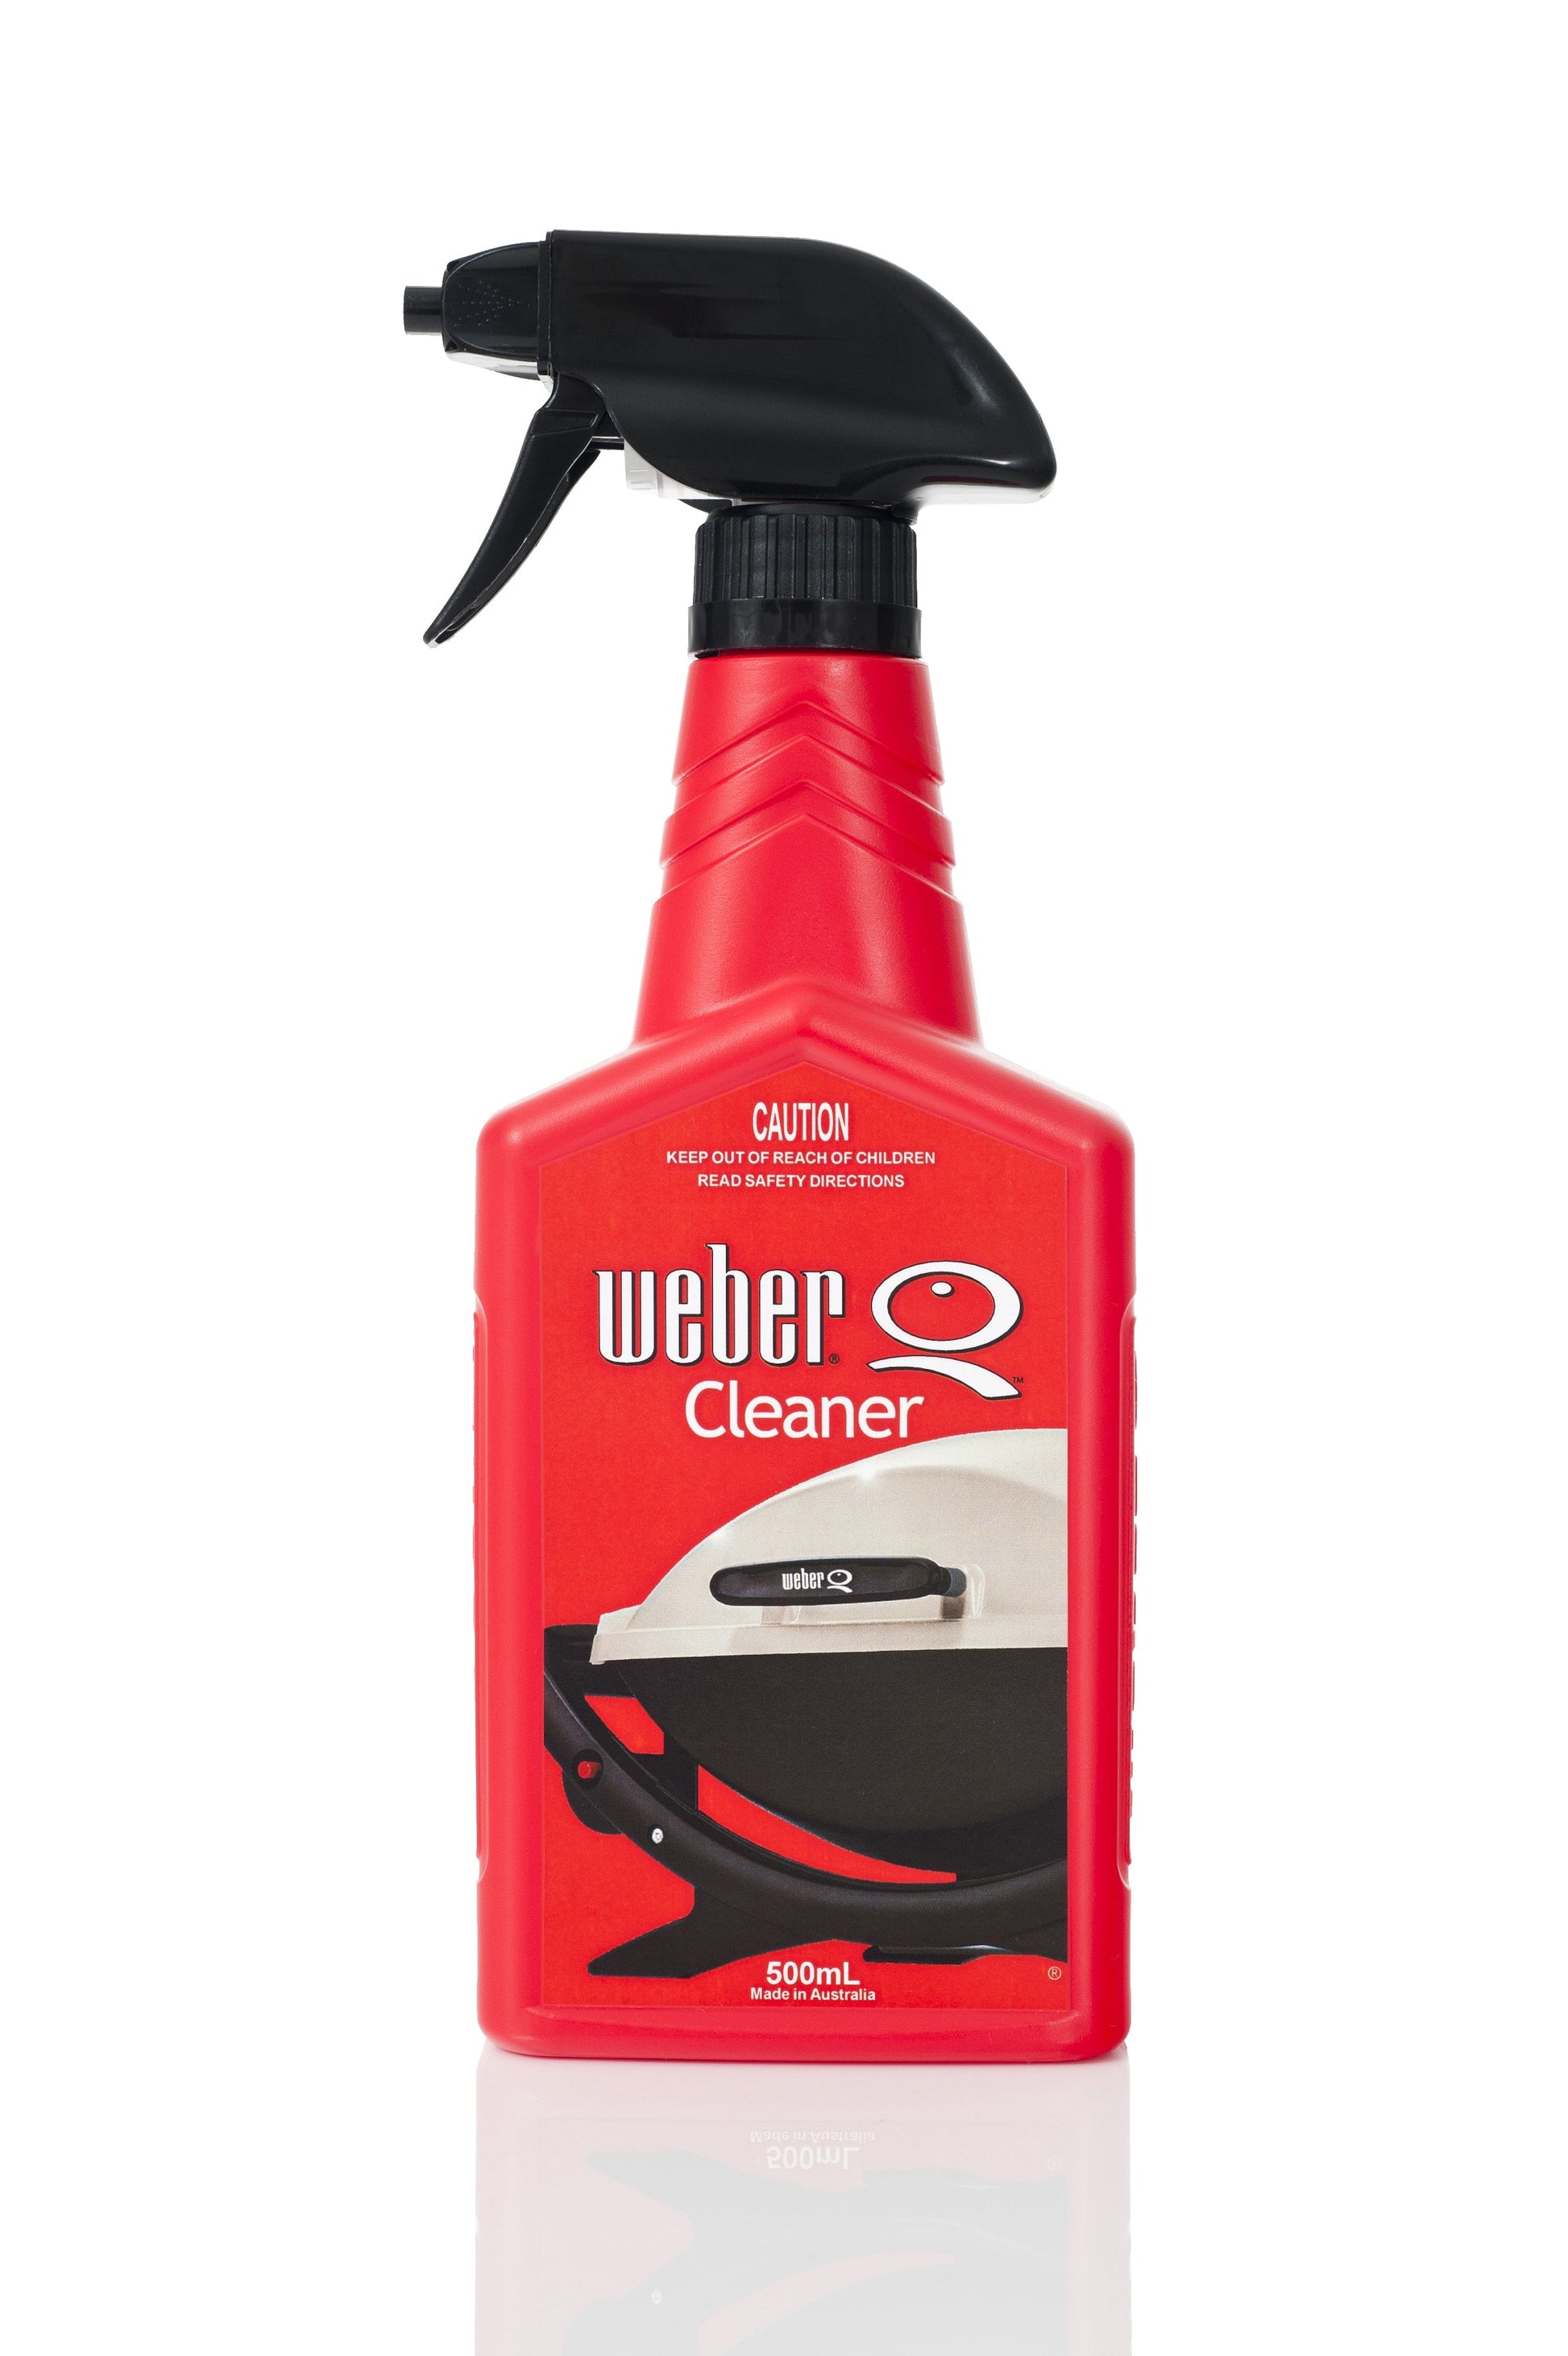 How To Guide: Cleaning Your Weber Q, by WeberHQ